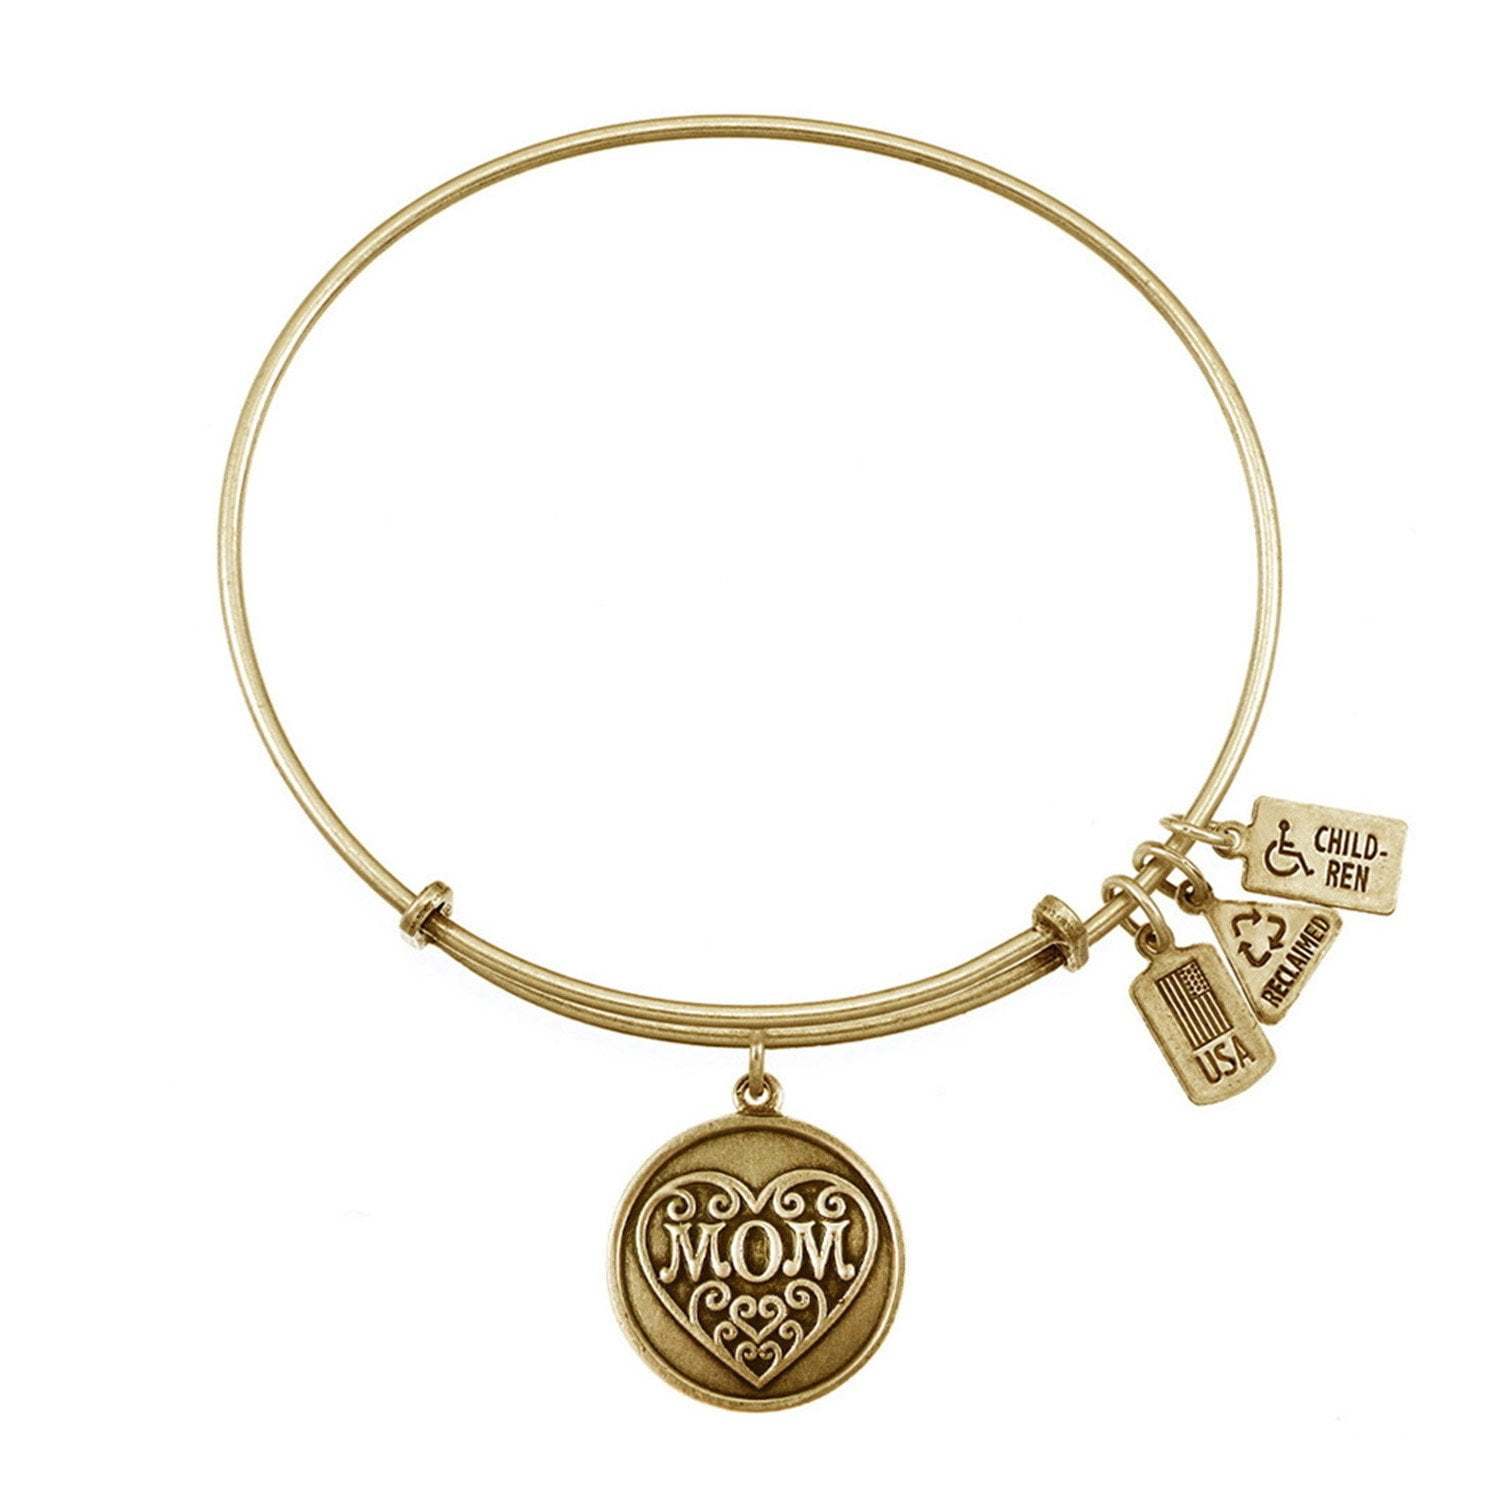 Mom Filigree Heart Charm Bracelet in Goldtone, Gold-Tone By Wind and Fire